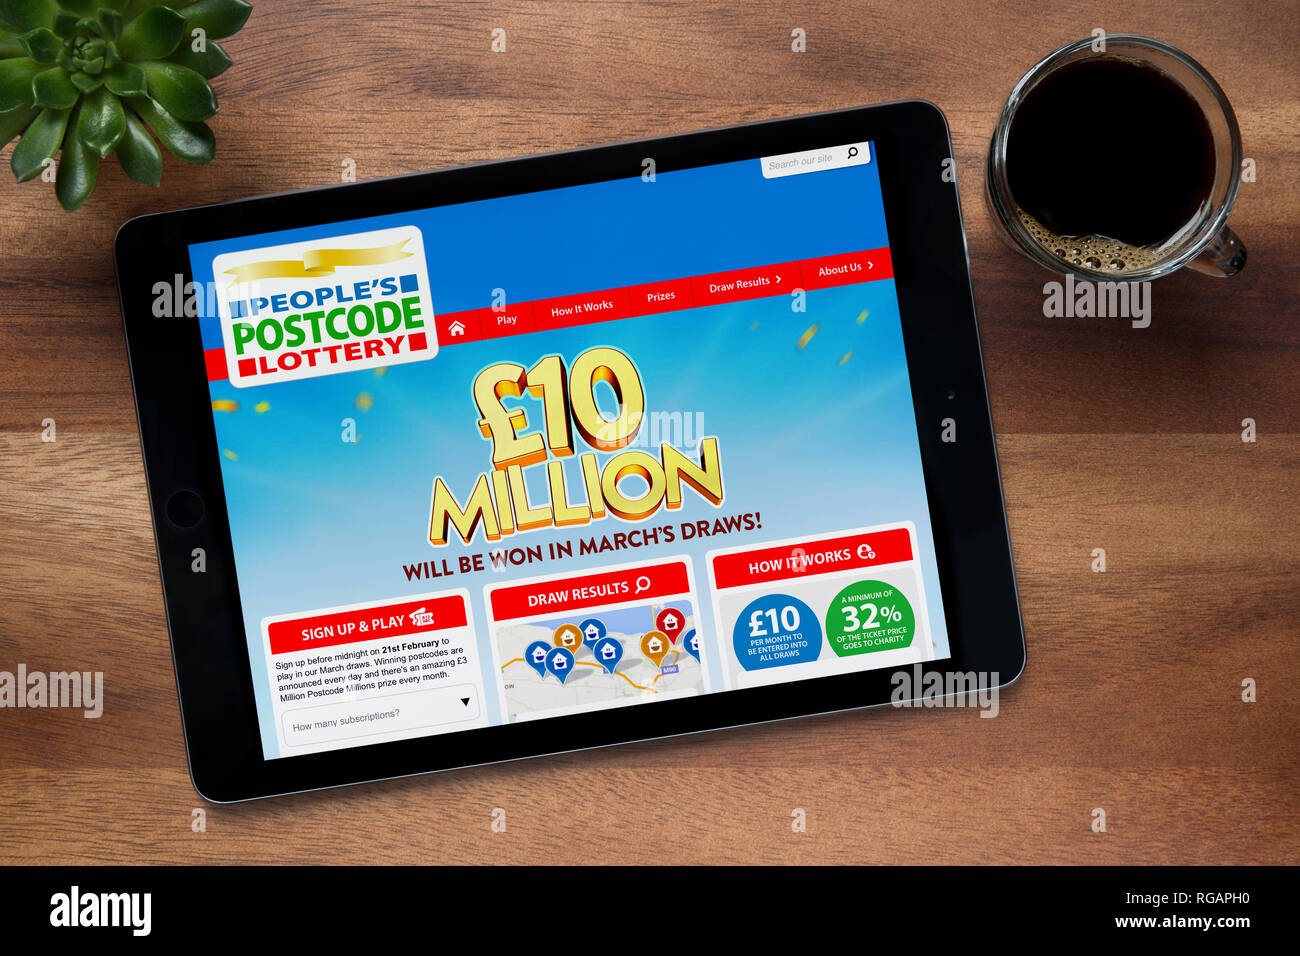 The website of People’s Postcode Lottery is seen on an iPad tablet, on a wooden table along with an espresso coffee and a house plant (Editorial only) Stock Photo